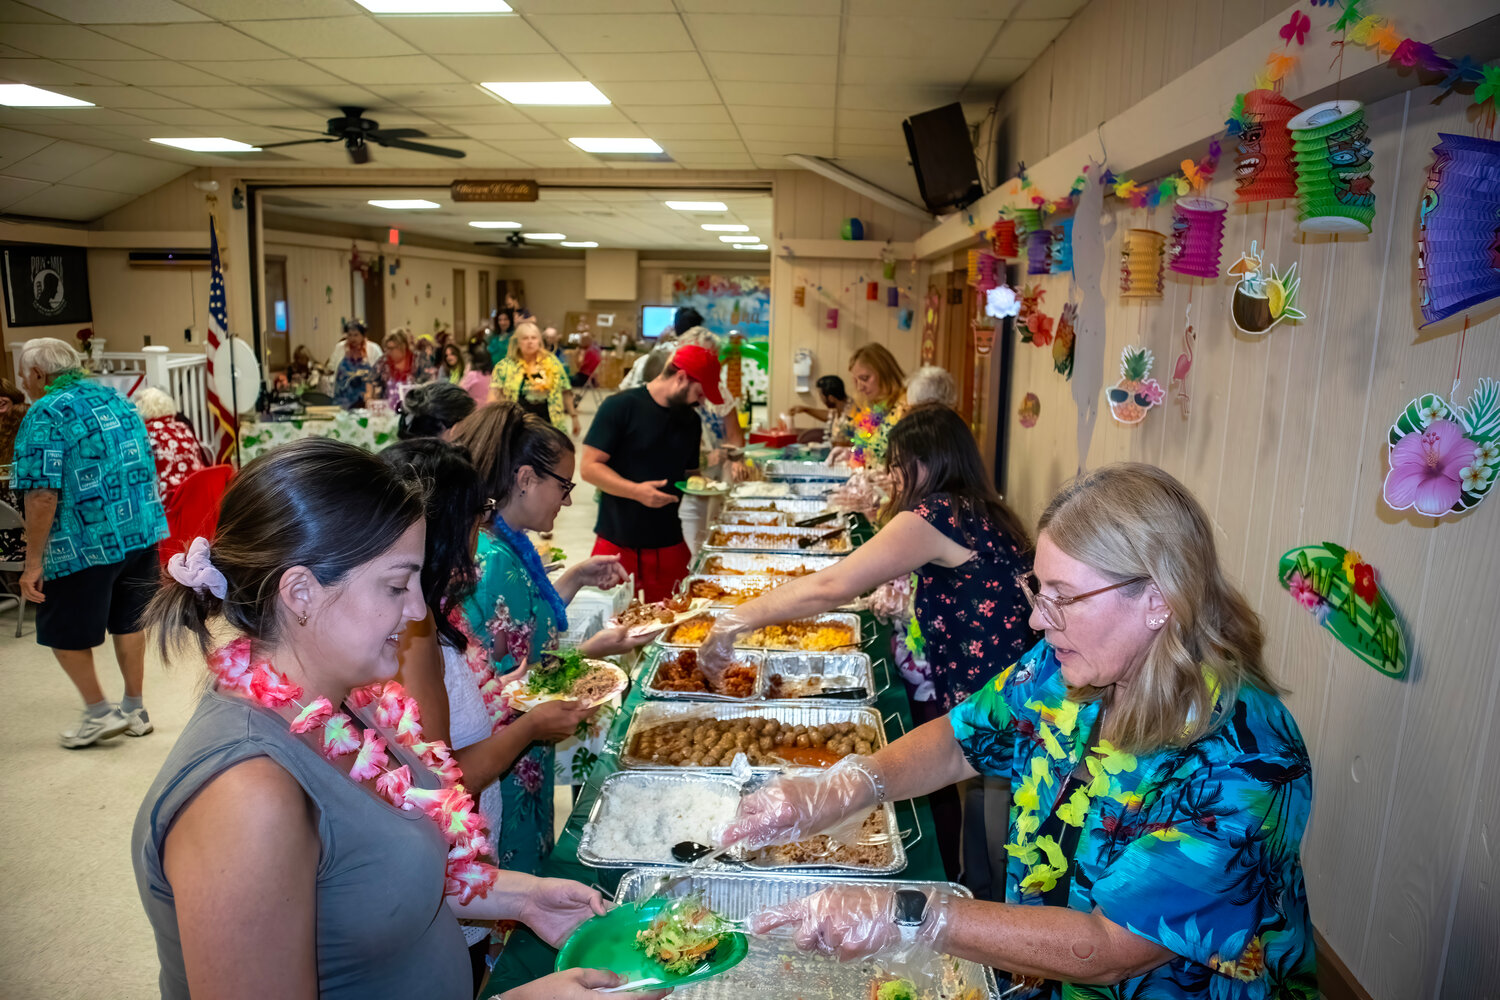 Salad, meatballs, pasta and more were served for event attendees to chow down on during bingo.